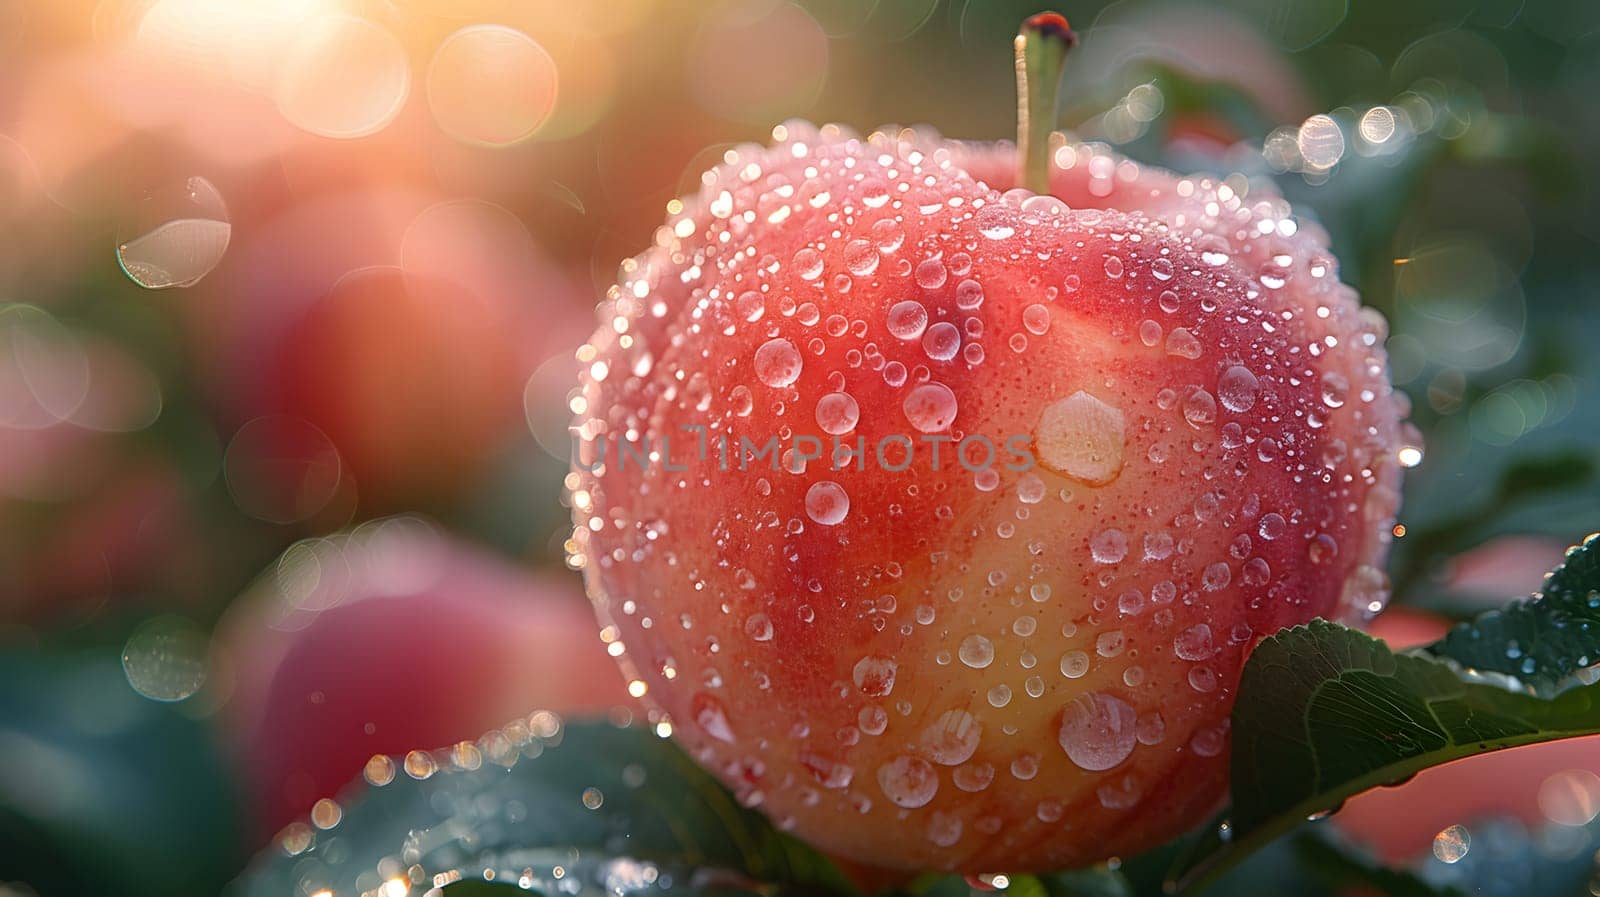 A close up of a watercovered apple, a seedless fruit from a tree, a terrestrial plant, and natural food ingredient. A delicious and refreshing fruit rich in nutrients